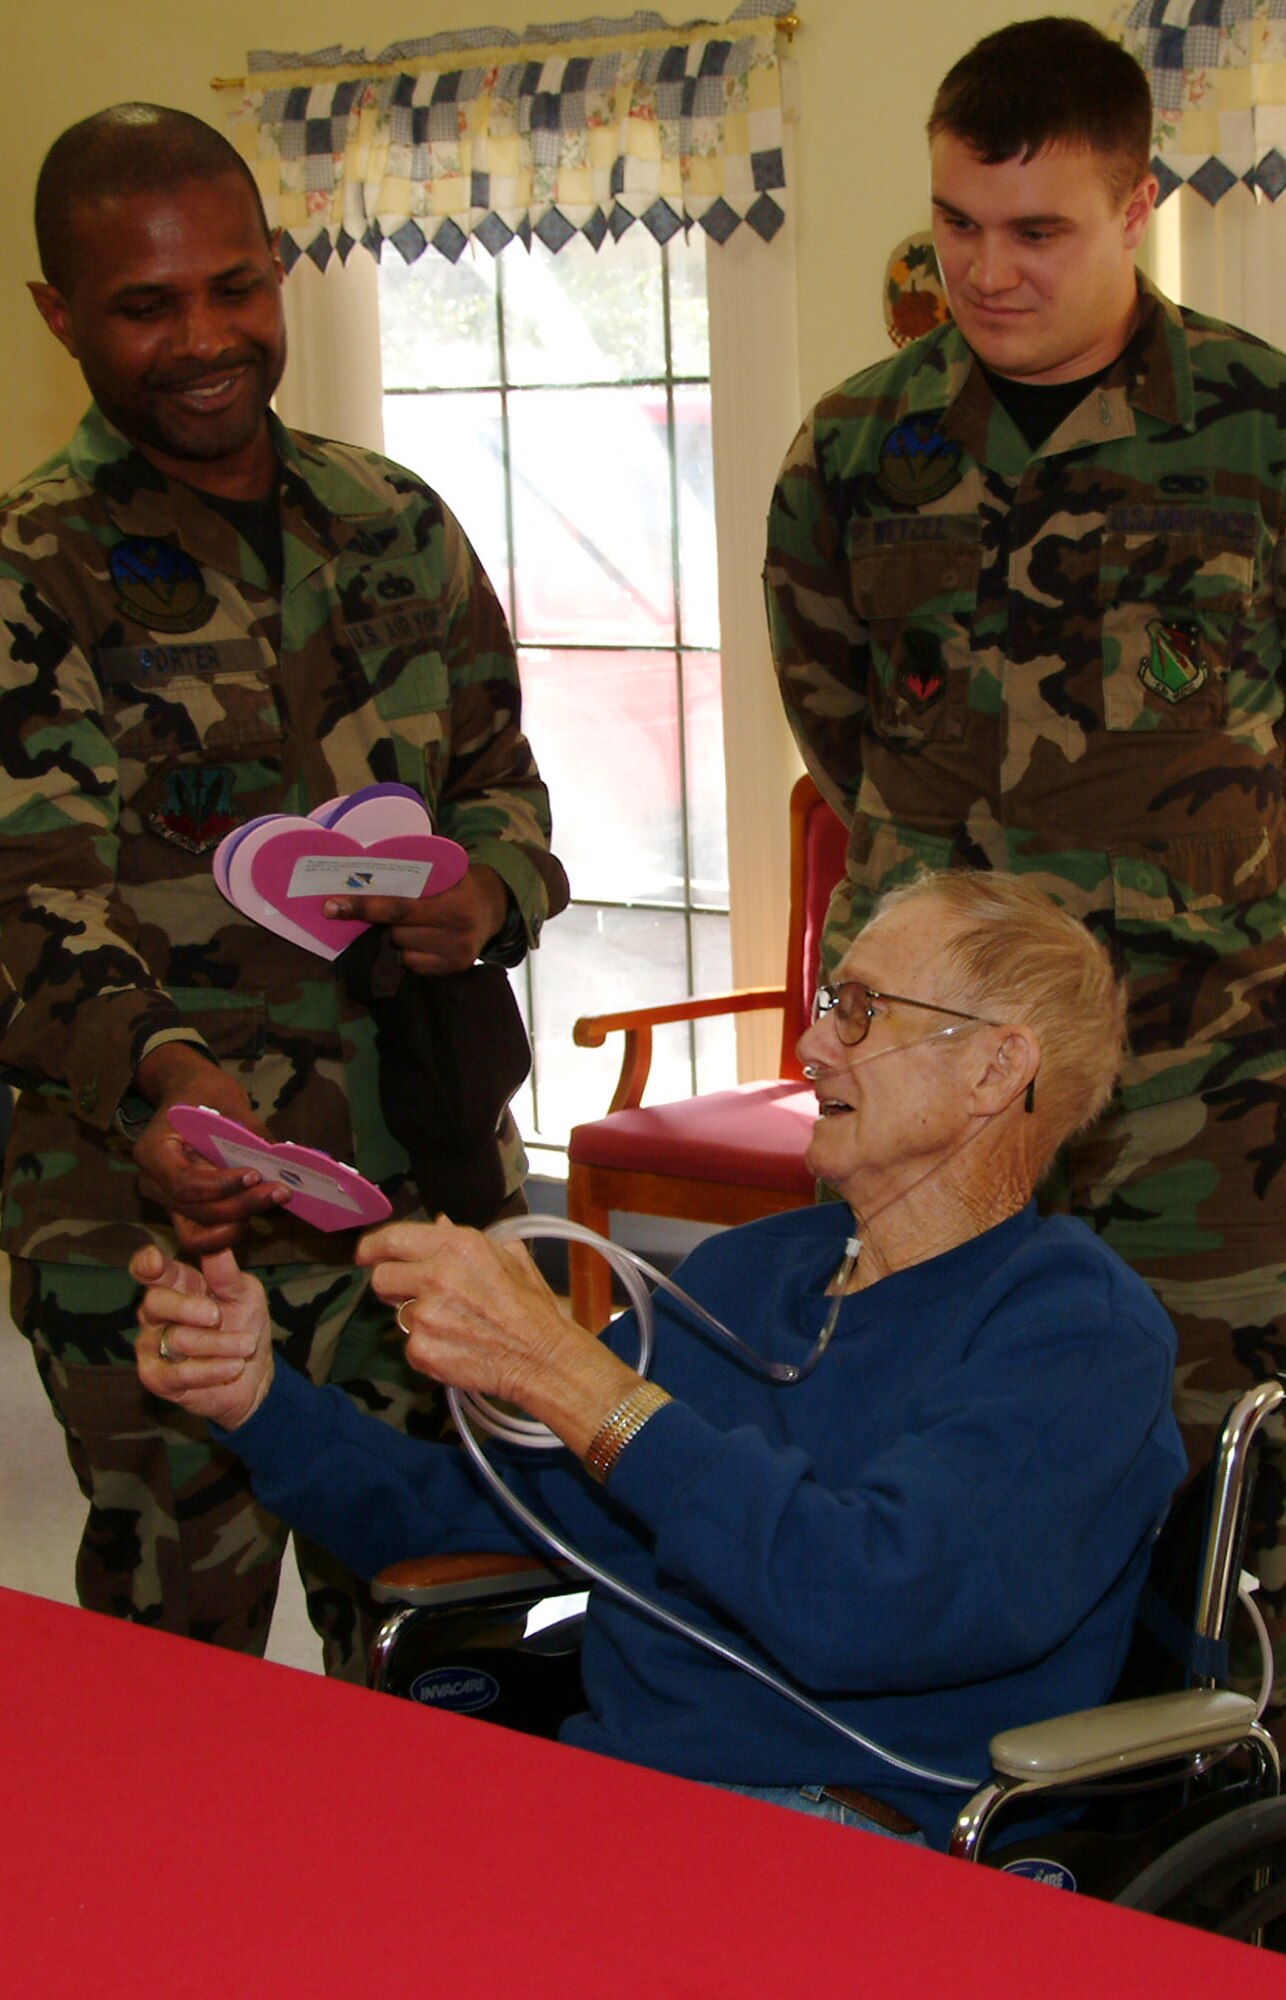 Master Sgt. Meoyski Porter, 53d Electronic Warfare Group, presents a Valentine to Homer Guernsey Feb. 14 at the Silvercrest Rehabilitation Center in Crestview Fla.  More than 50 active duty 53d Wing members presented vets in nursing homes around the local area with cards and candy on Valentine's Day.  U.S. Air Force photo by Master Sgt. Andrew Leonhard.  